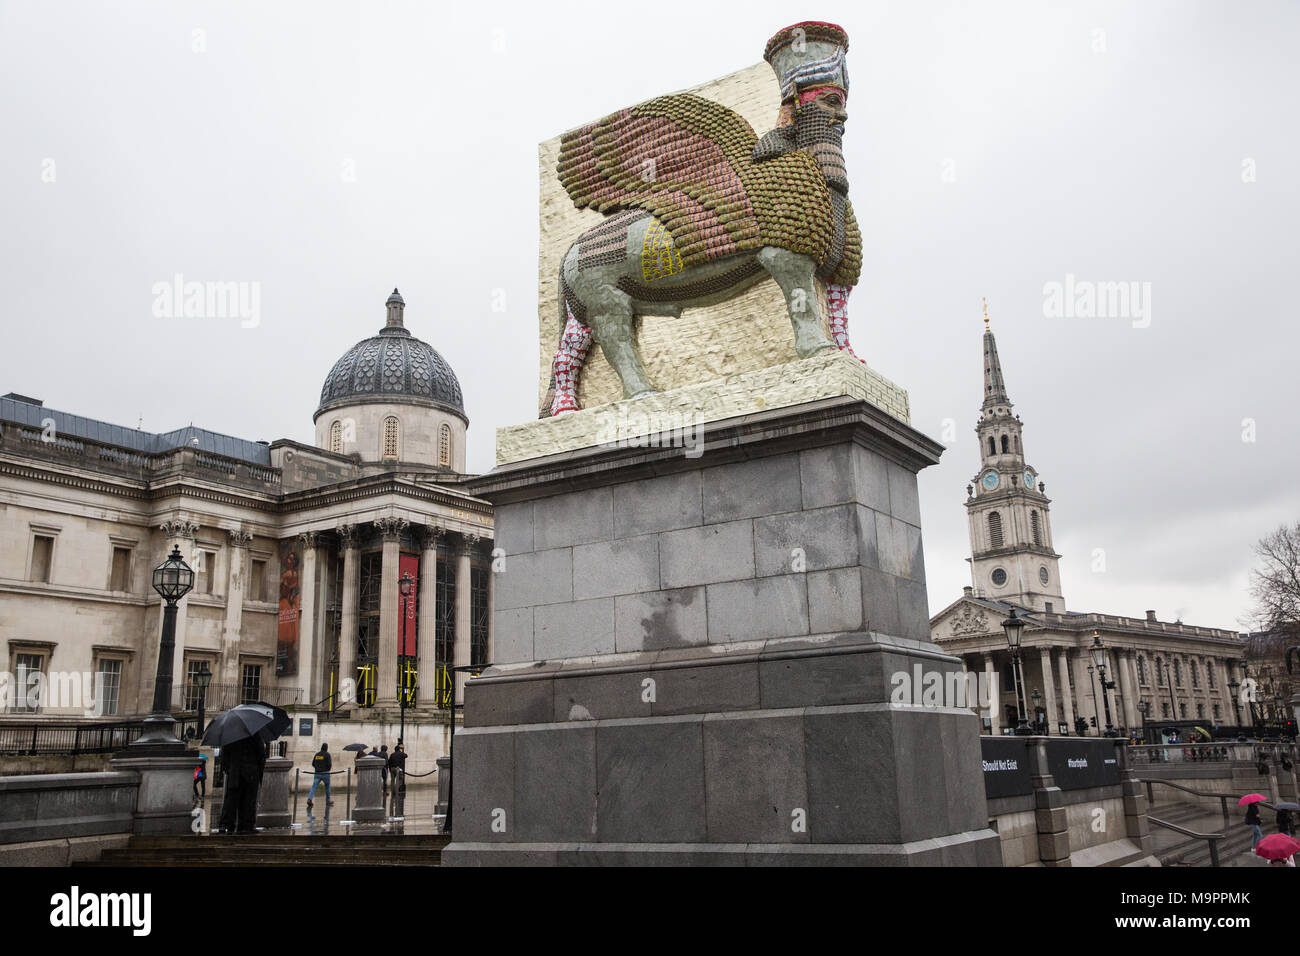 London, UK. 28th March, 2018. Michael Rakowitz’s ‘The Invisible Enemy Should Not Exist’ has been unveiled on the Fourth Plinth in Trafalgar Square. A life-size reproduction of one of the large stone statues of a lamassu (a winged bull with a human face) which guarded the gates of the ancient city of Nineveh in Iraq until destroyed by ISIS, it was armoured with 10,500 tin cans used for date syrup. It has been positioned to face towards the Foreign Office, Parliament and the Middle East. Credit: Mark Kerrison/Alamy Live News Stock Photo